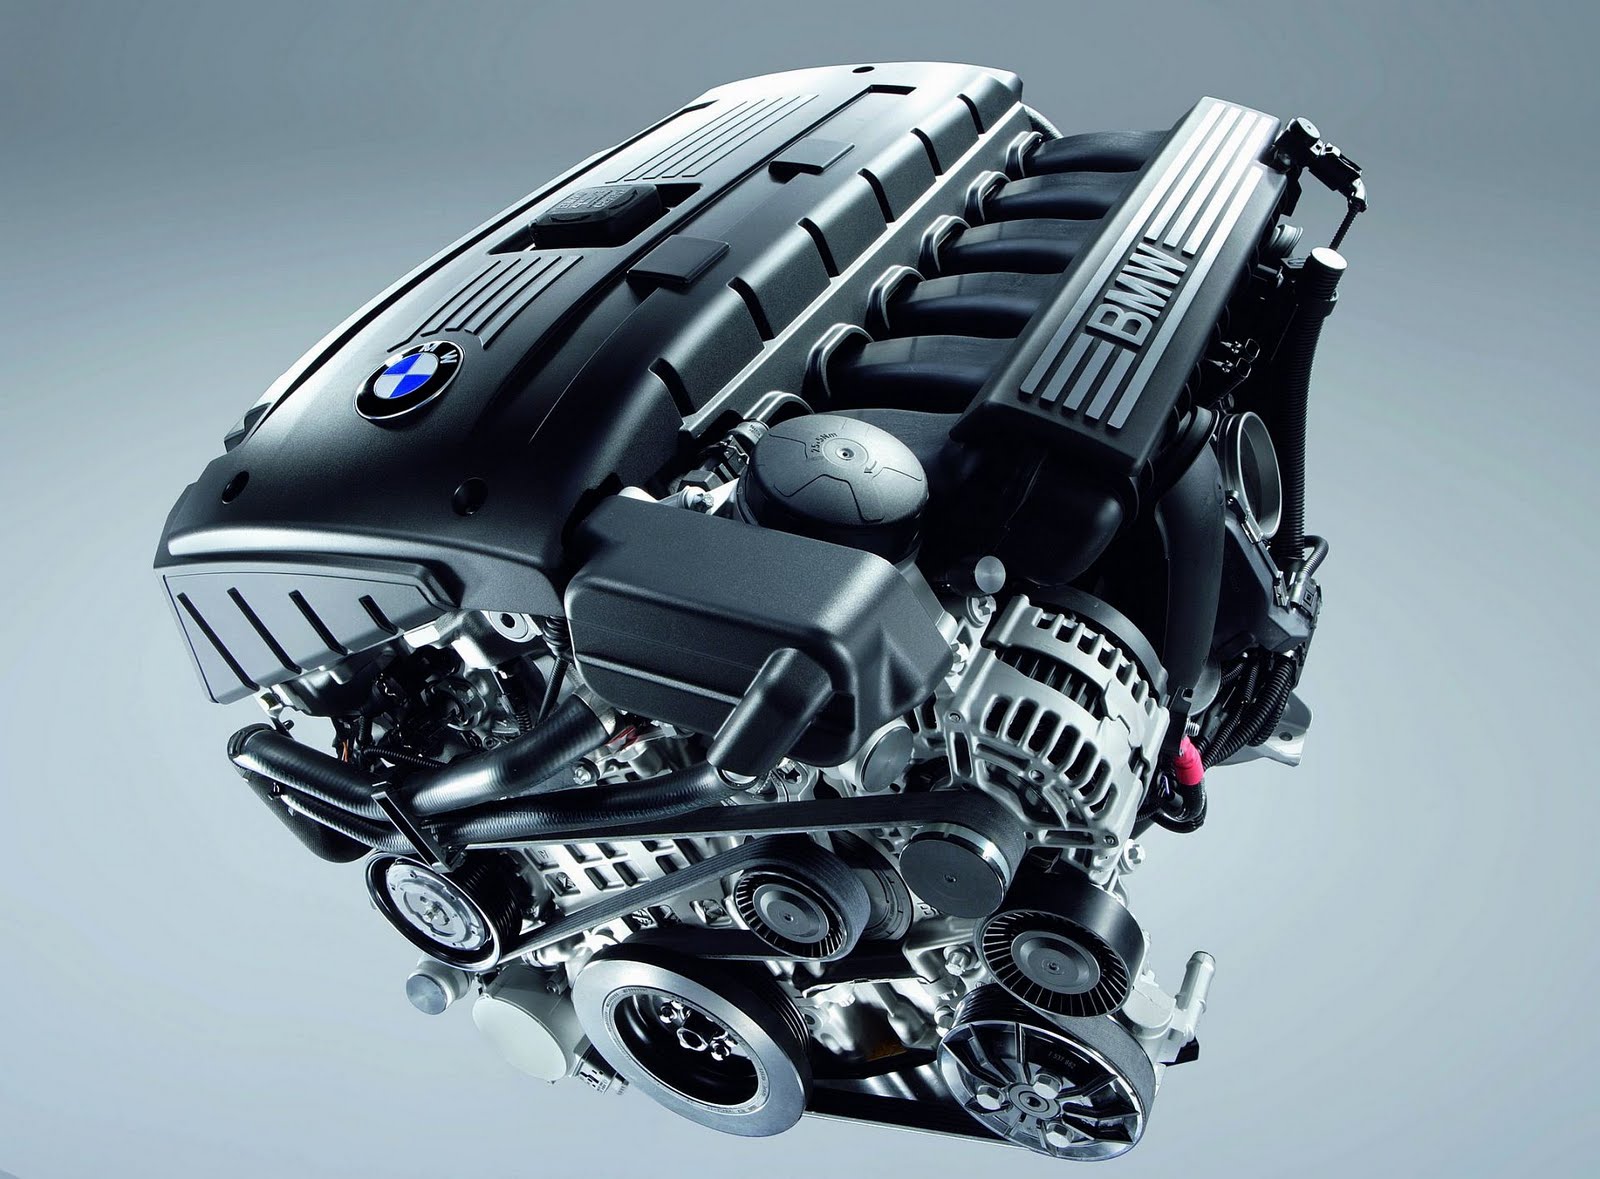 Bmw engine of the year awards #2